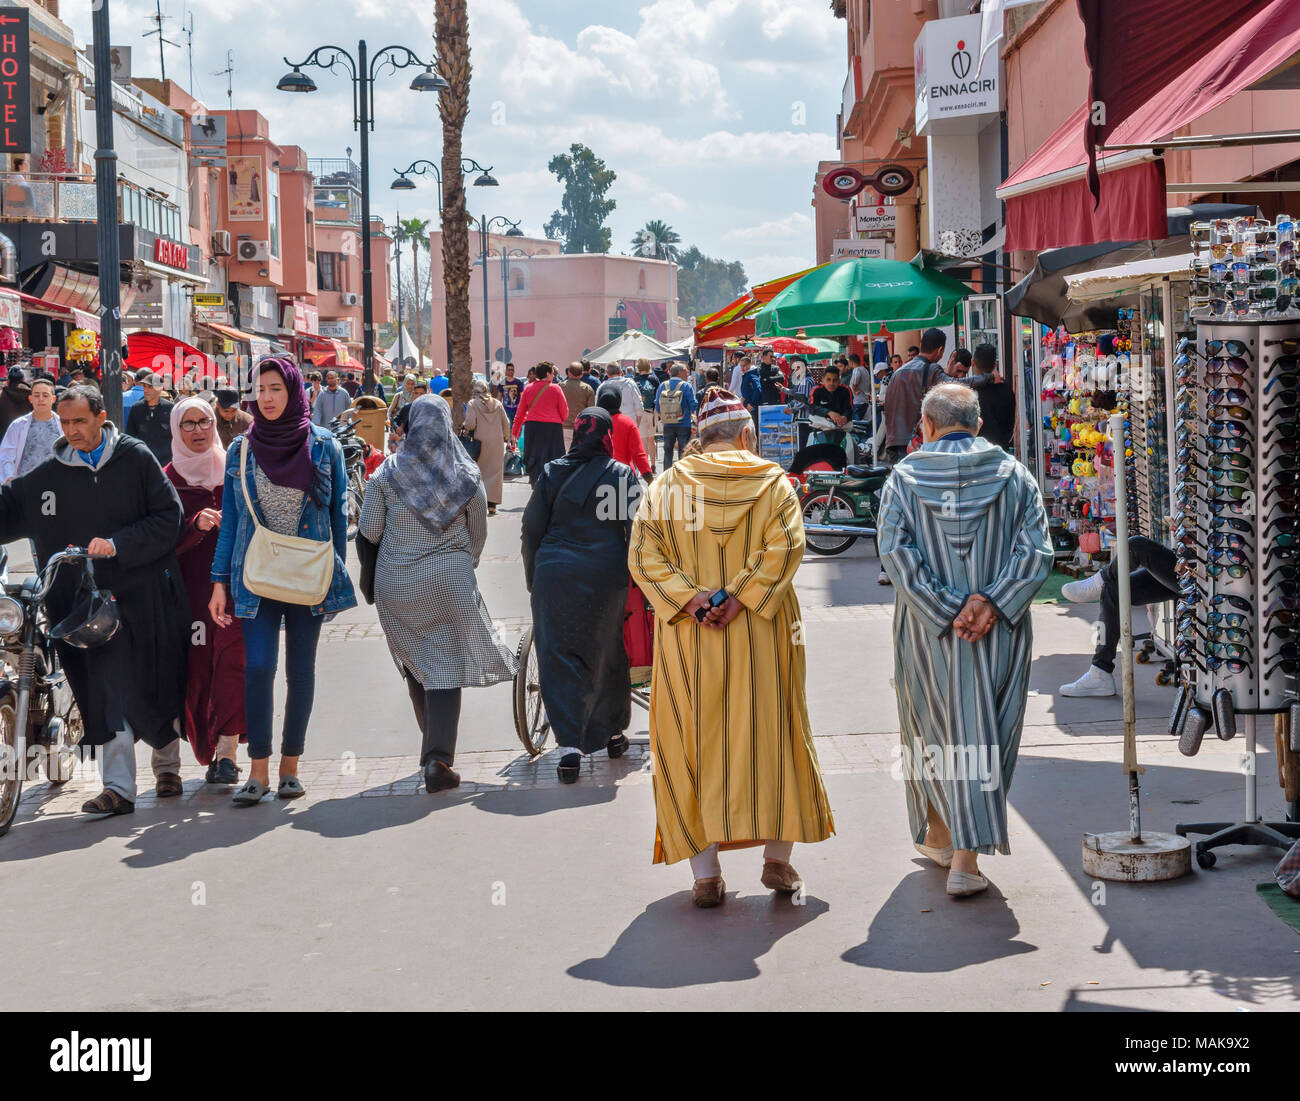 MOROCCO MARRAKECH STREET SCENE WITH PEOPLE DRESSED IN TRADITIONAL CLOTHES THE DJELLABA Stock Photo